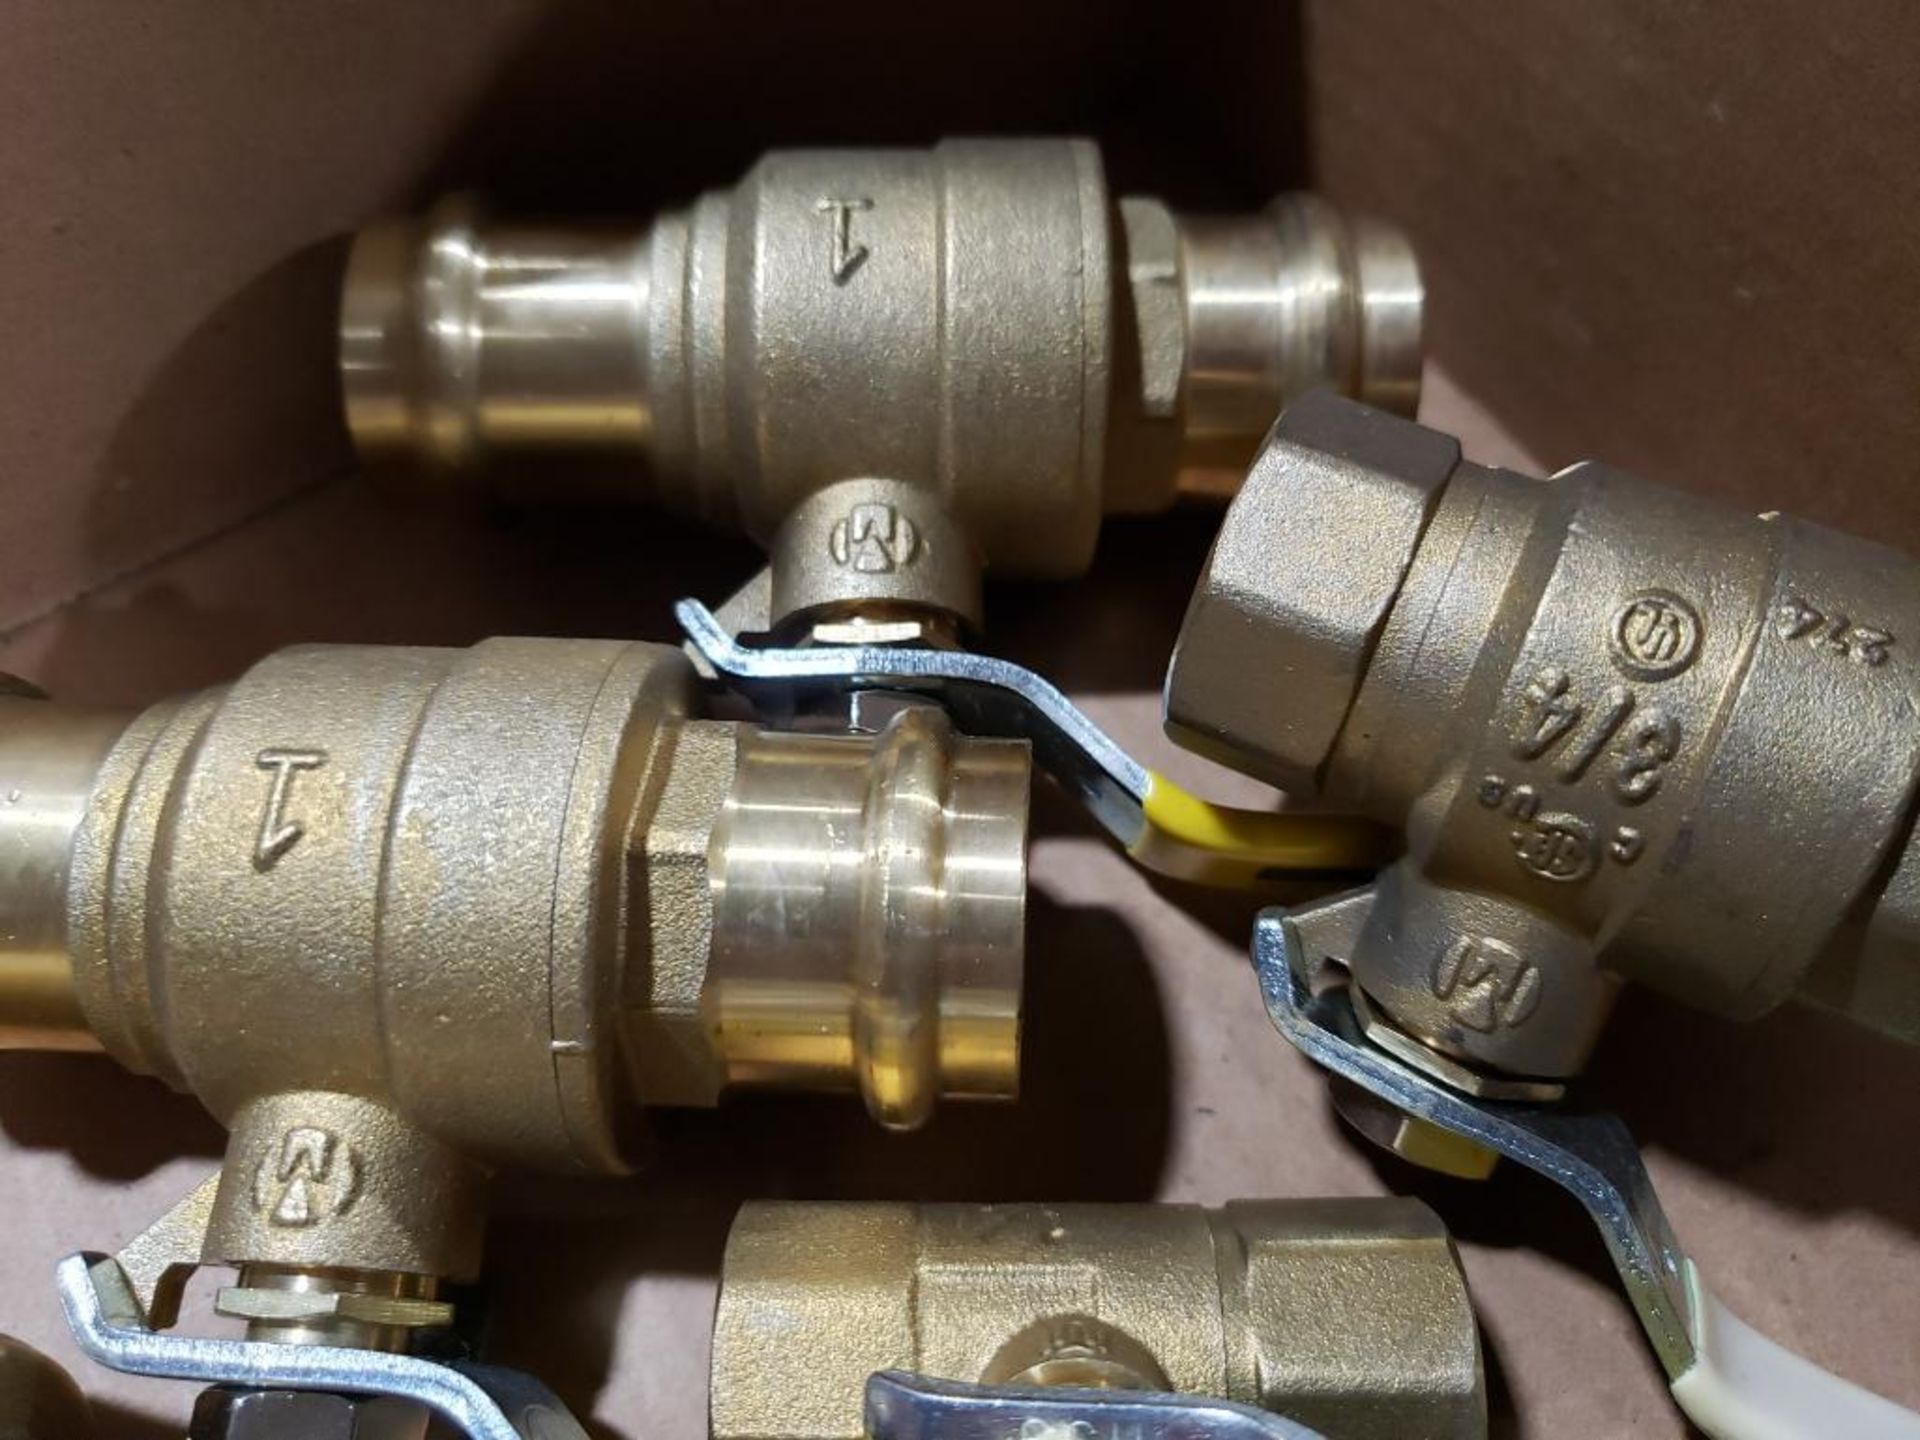 Qty 11 - Assorted brass valves. New as pictured. - Image 7 of 10